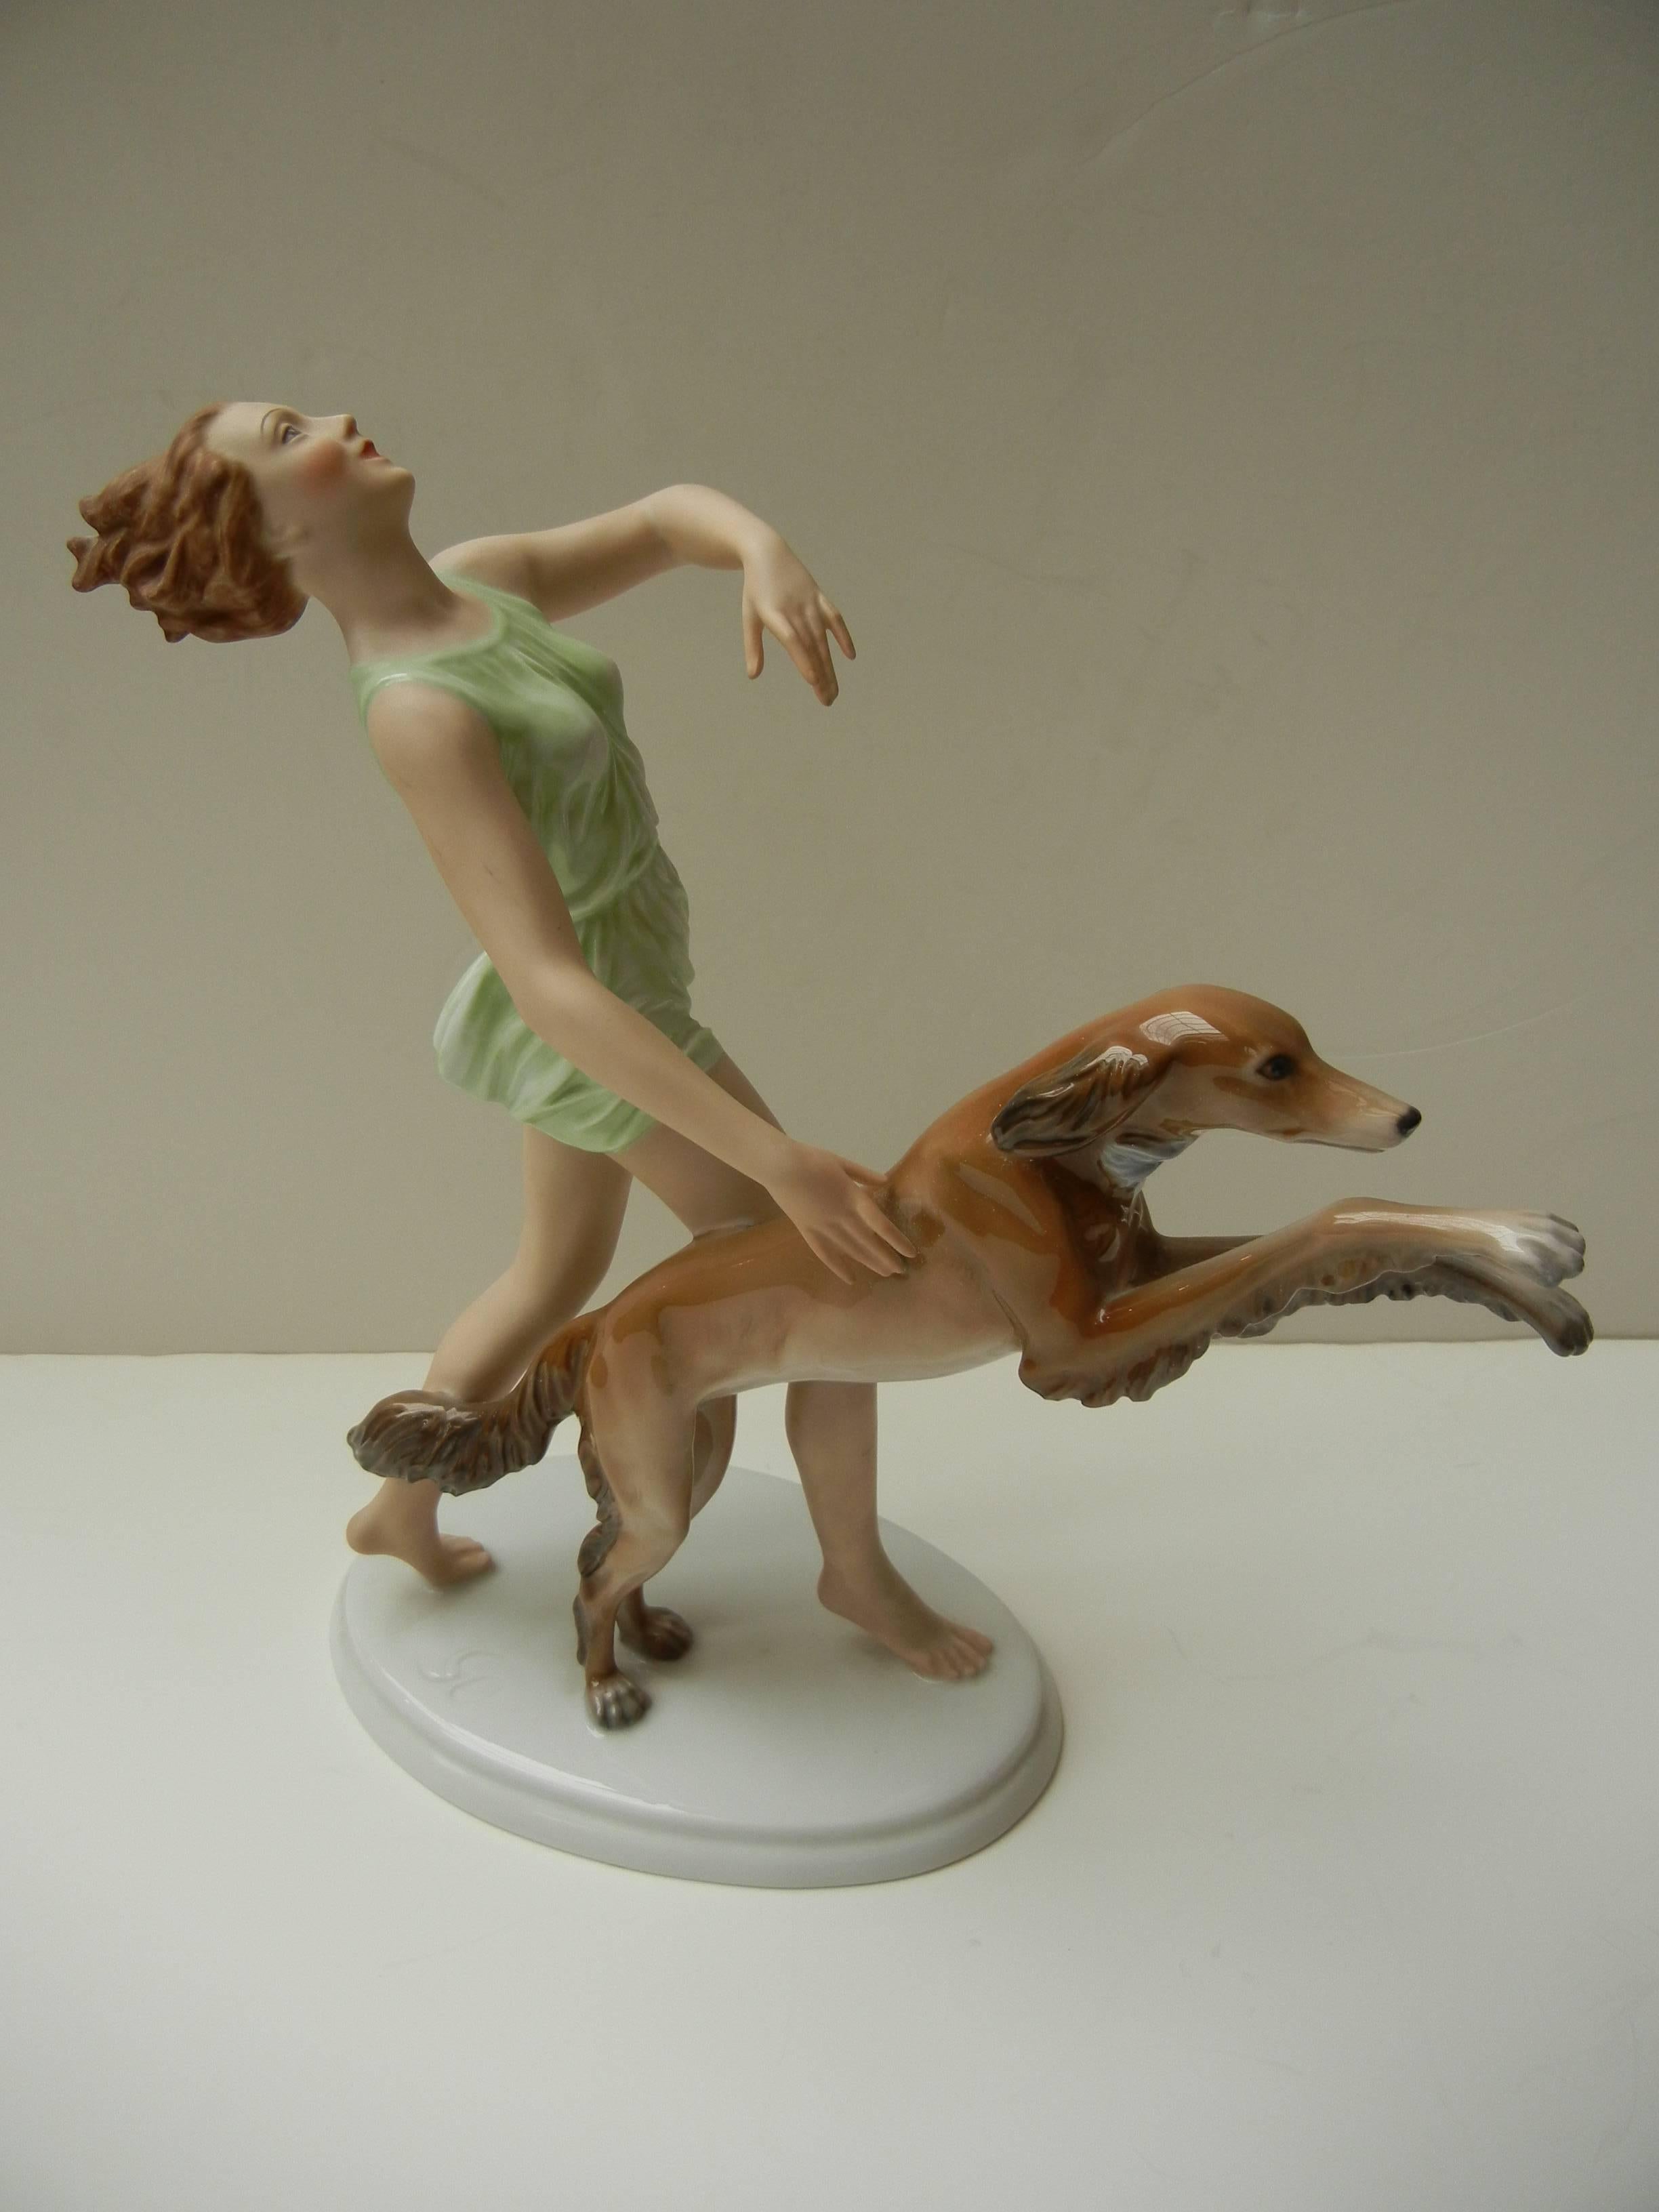 A lovely Art Deco figure by Rosenthal featuring a lady running beside a Saluki dog designed by Gustav Oppel. Originally designed for the 1936 Olympics.

Signed GO on top of base and marked with Rosenthal round mark on bottom.

No damage or